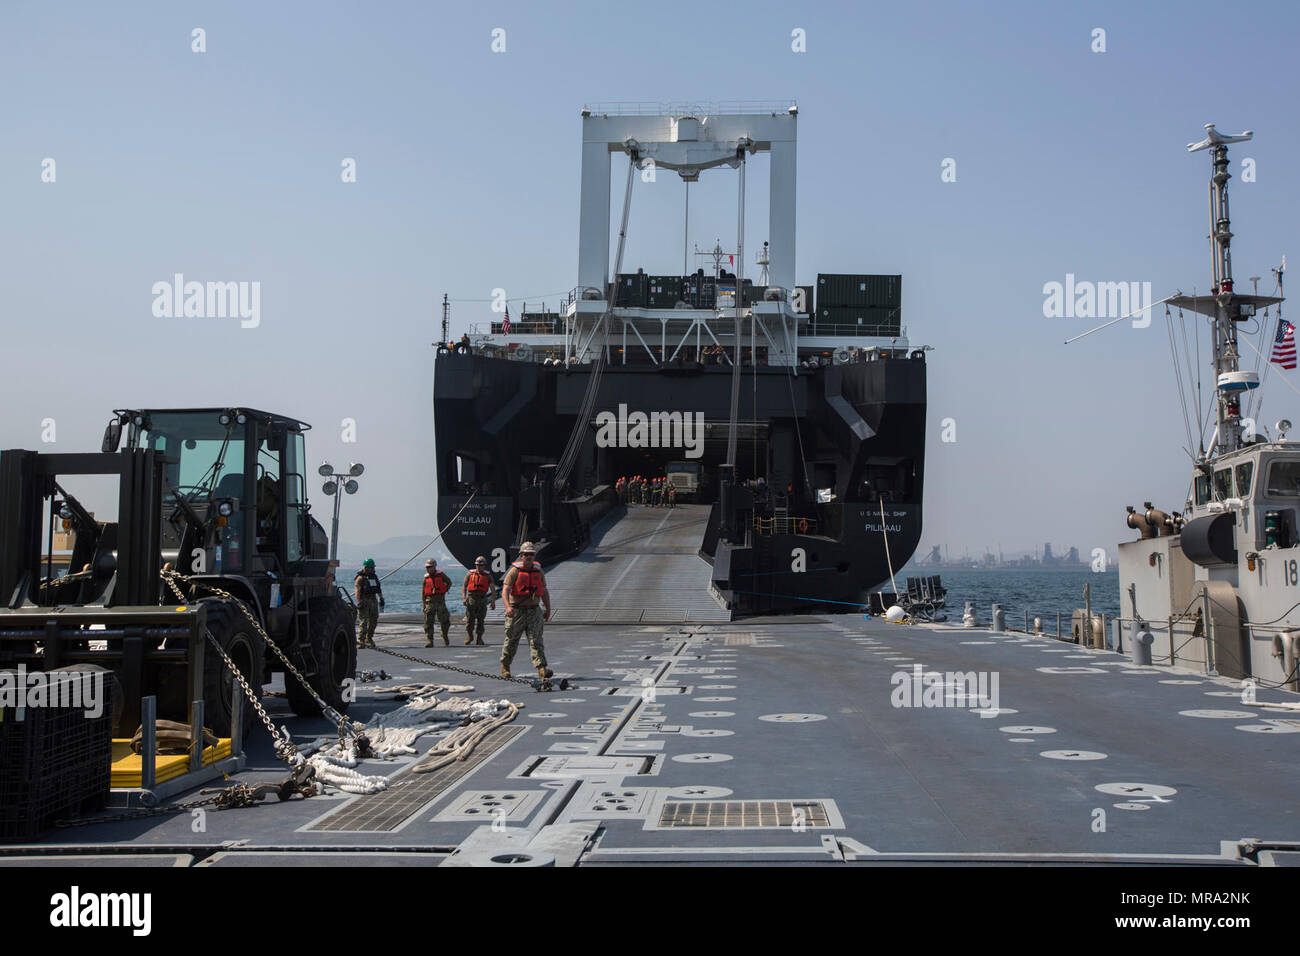 U.S. Marines, Sailors, and Coast Guardsmen aboard the USNS Pililaau conduct loading and off loading of cargo and gear during Combined Joint Logistics Over The Shore (CJ LOTS) Exercise in the Republic of Korea (ROK) in the Sea of Japan, Pohang, Korea, April 13, 2017. CJ LOTS is an exercise designed to train U.S. and ROK service members to accomplish vital logistical measures in a strategic area while strengthening communication and cooperation between the U.S. and ROK alliance. Stock Photo